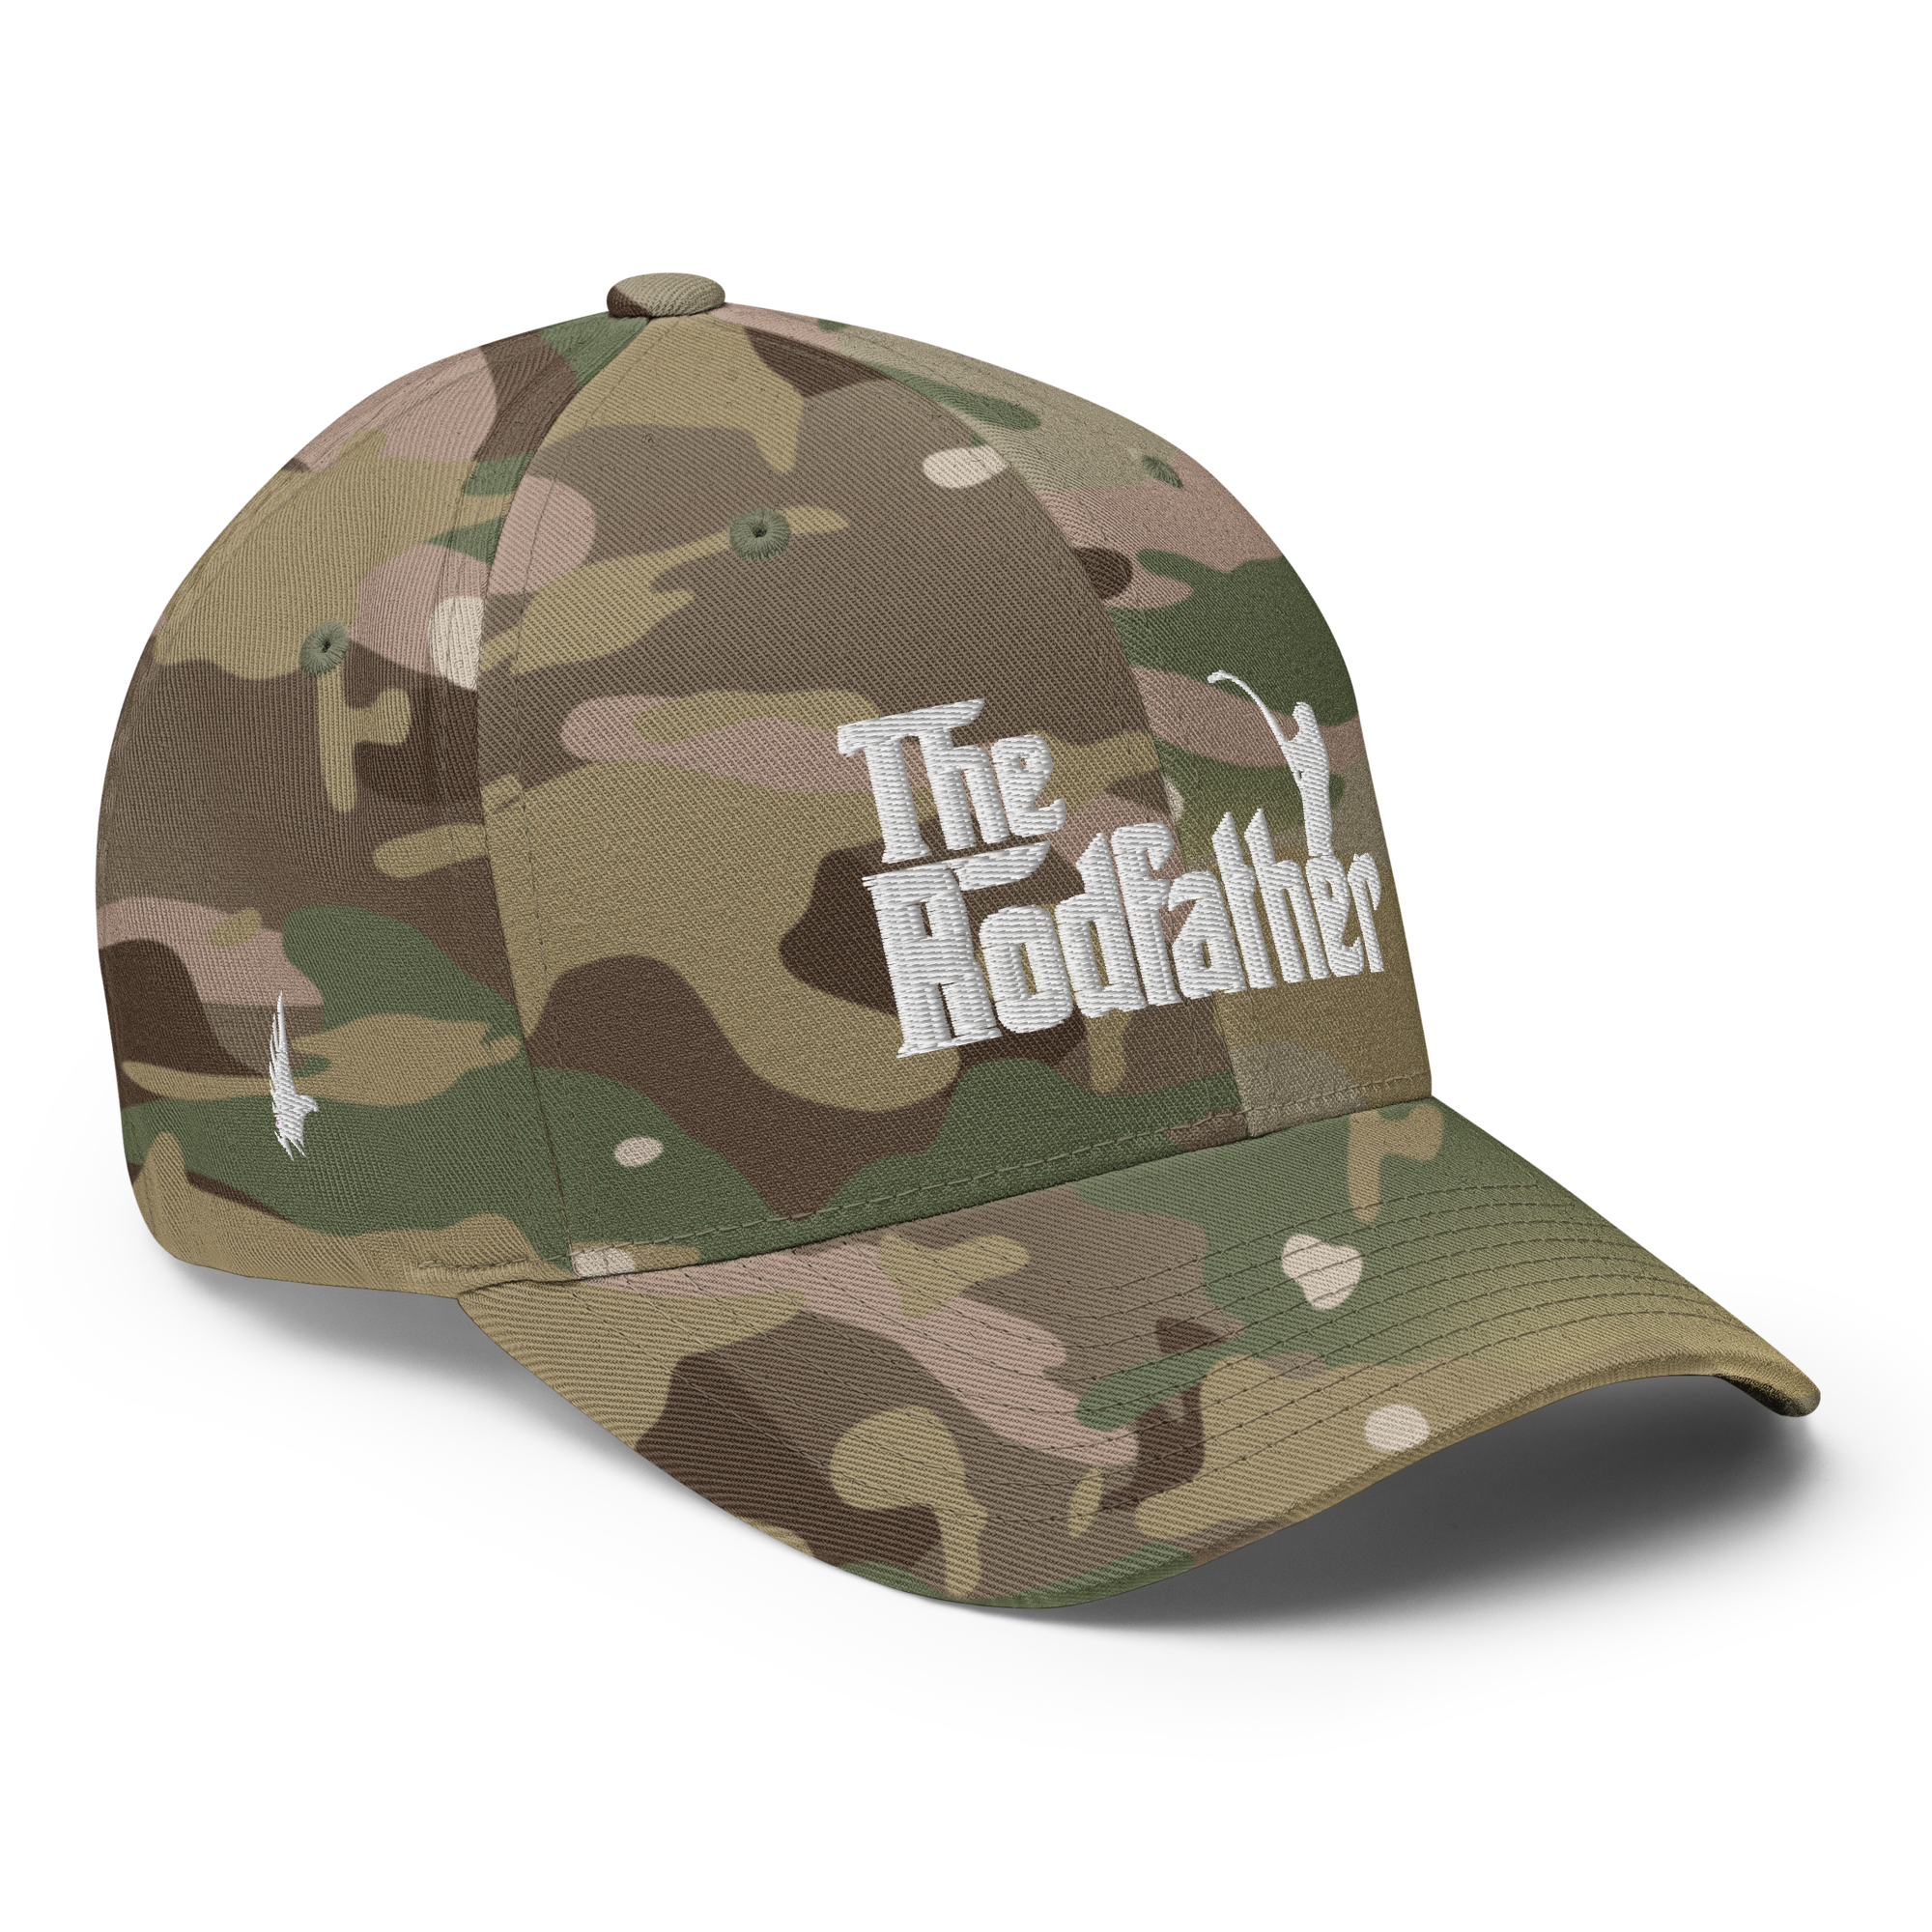 Rodfather Fitted Hat Camo - Loyalty Vibes